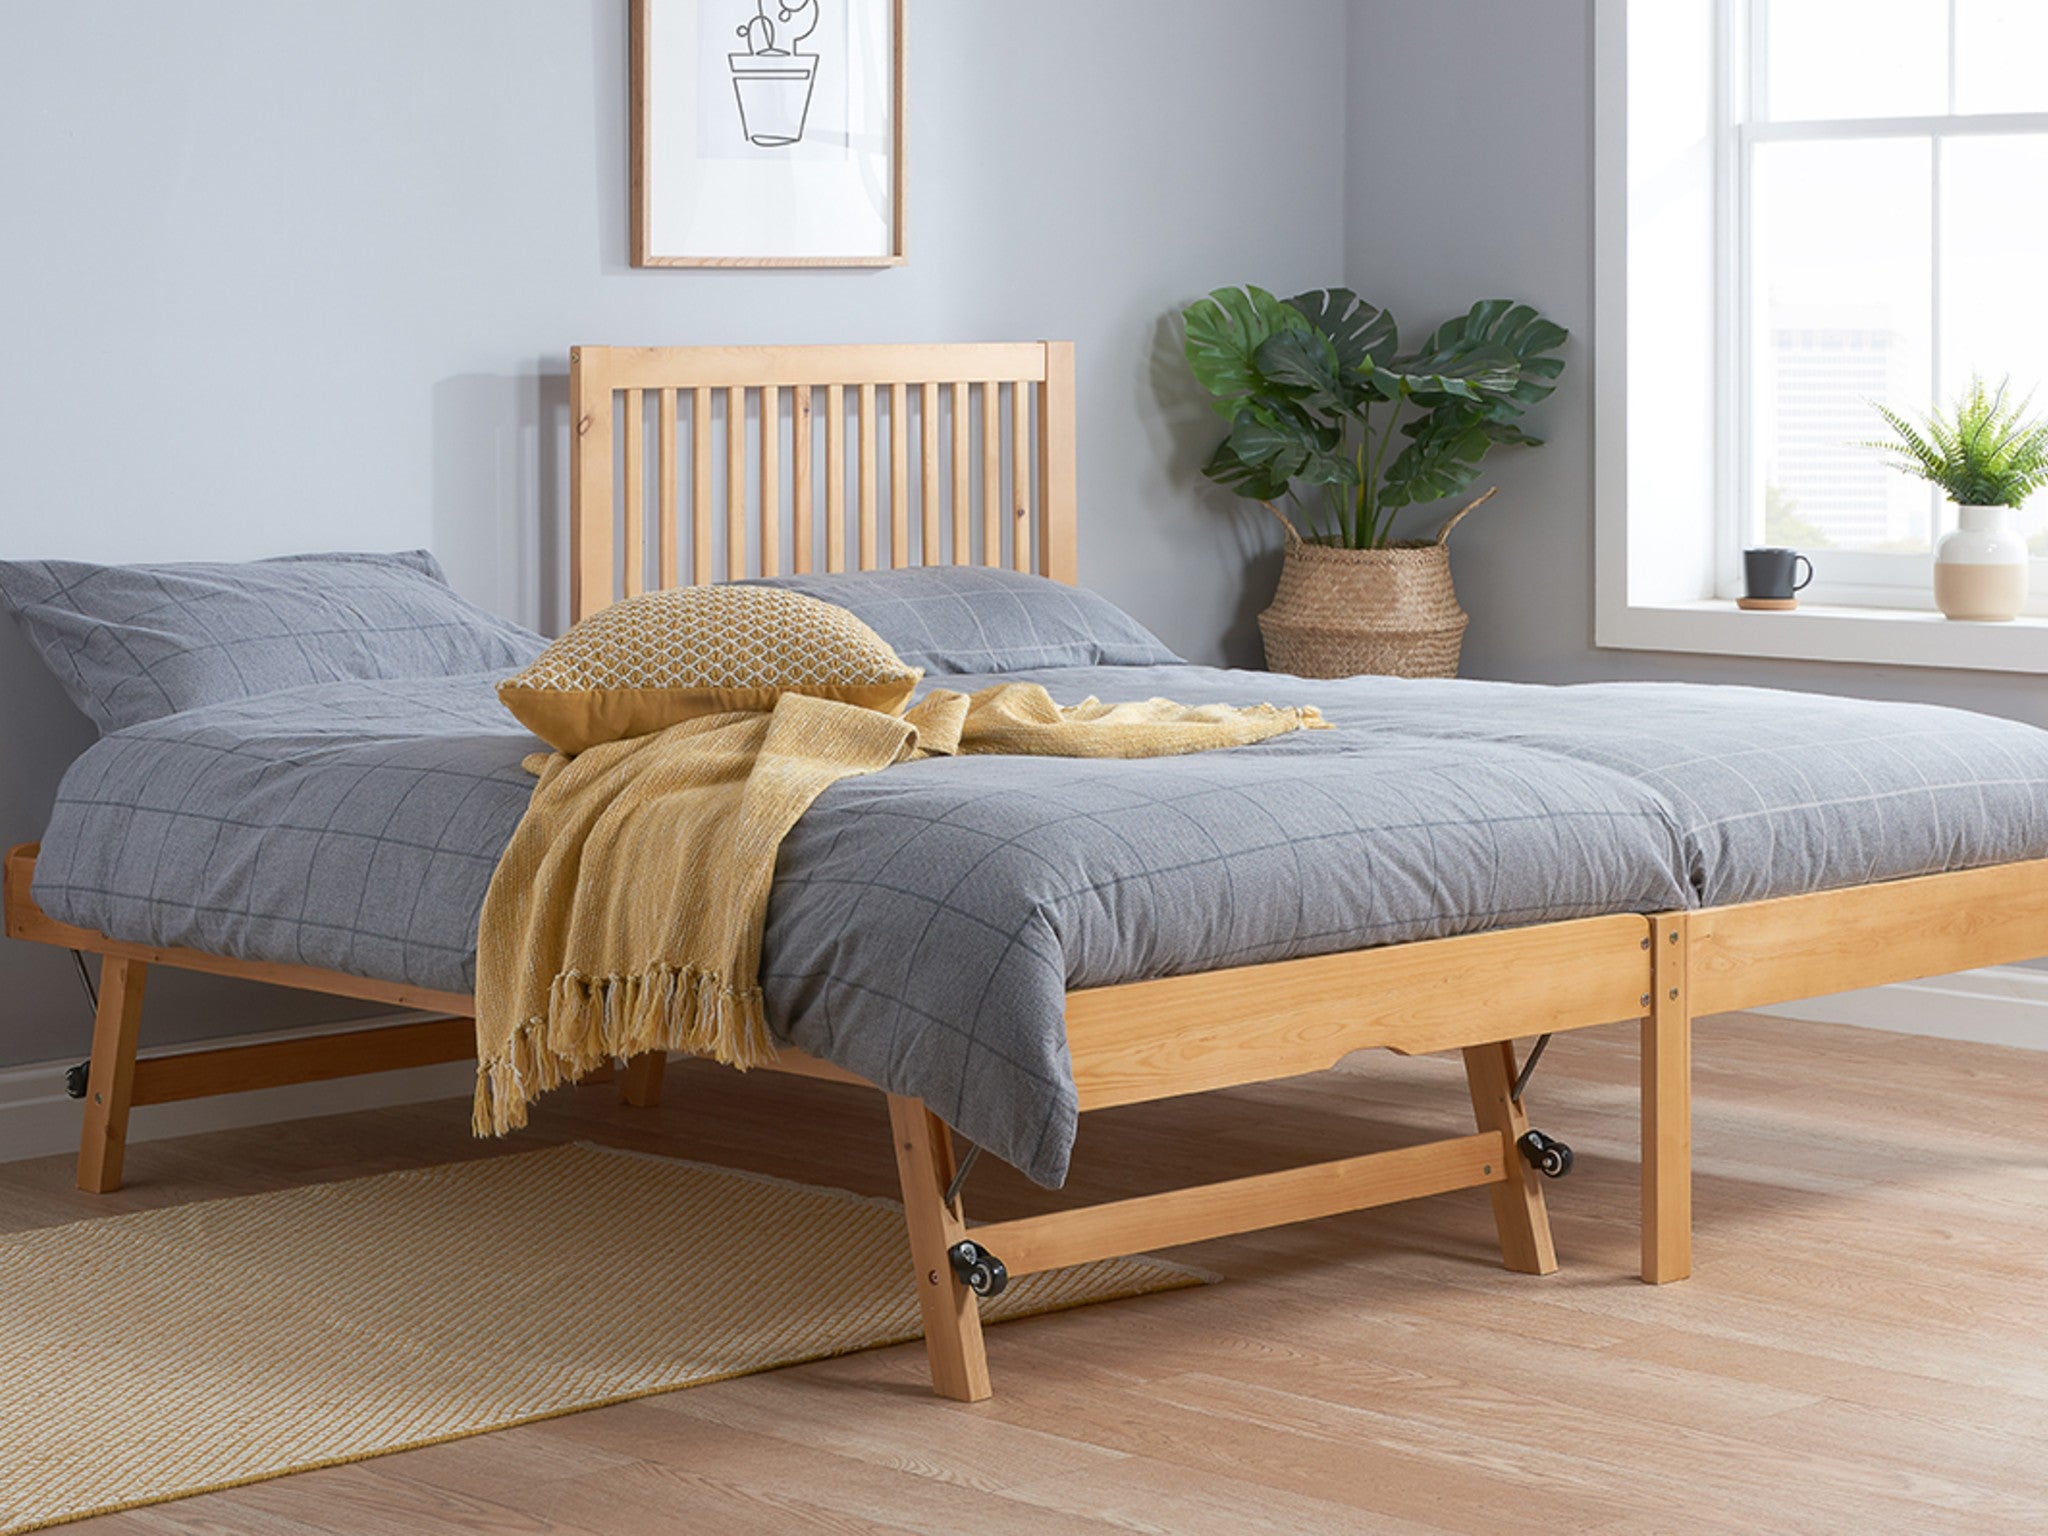 Happy Beds buxton pine wooden guest bed frame indybest.jpg